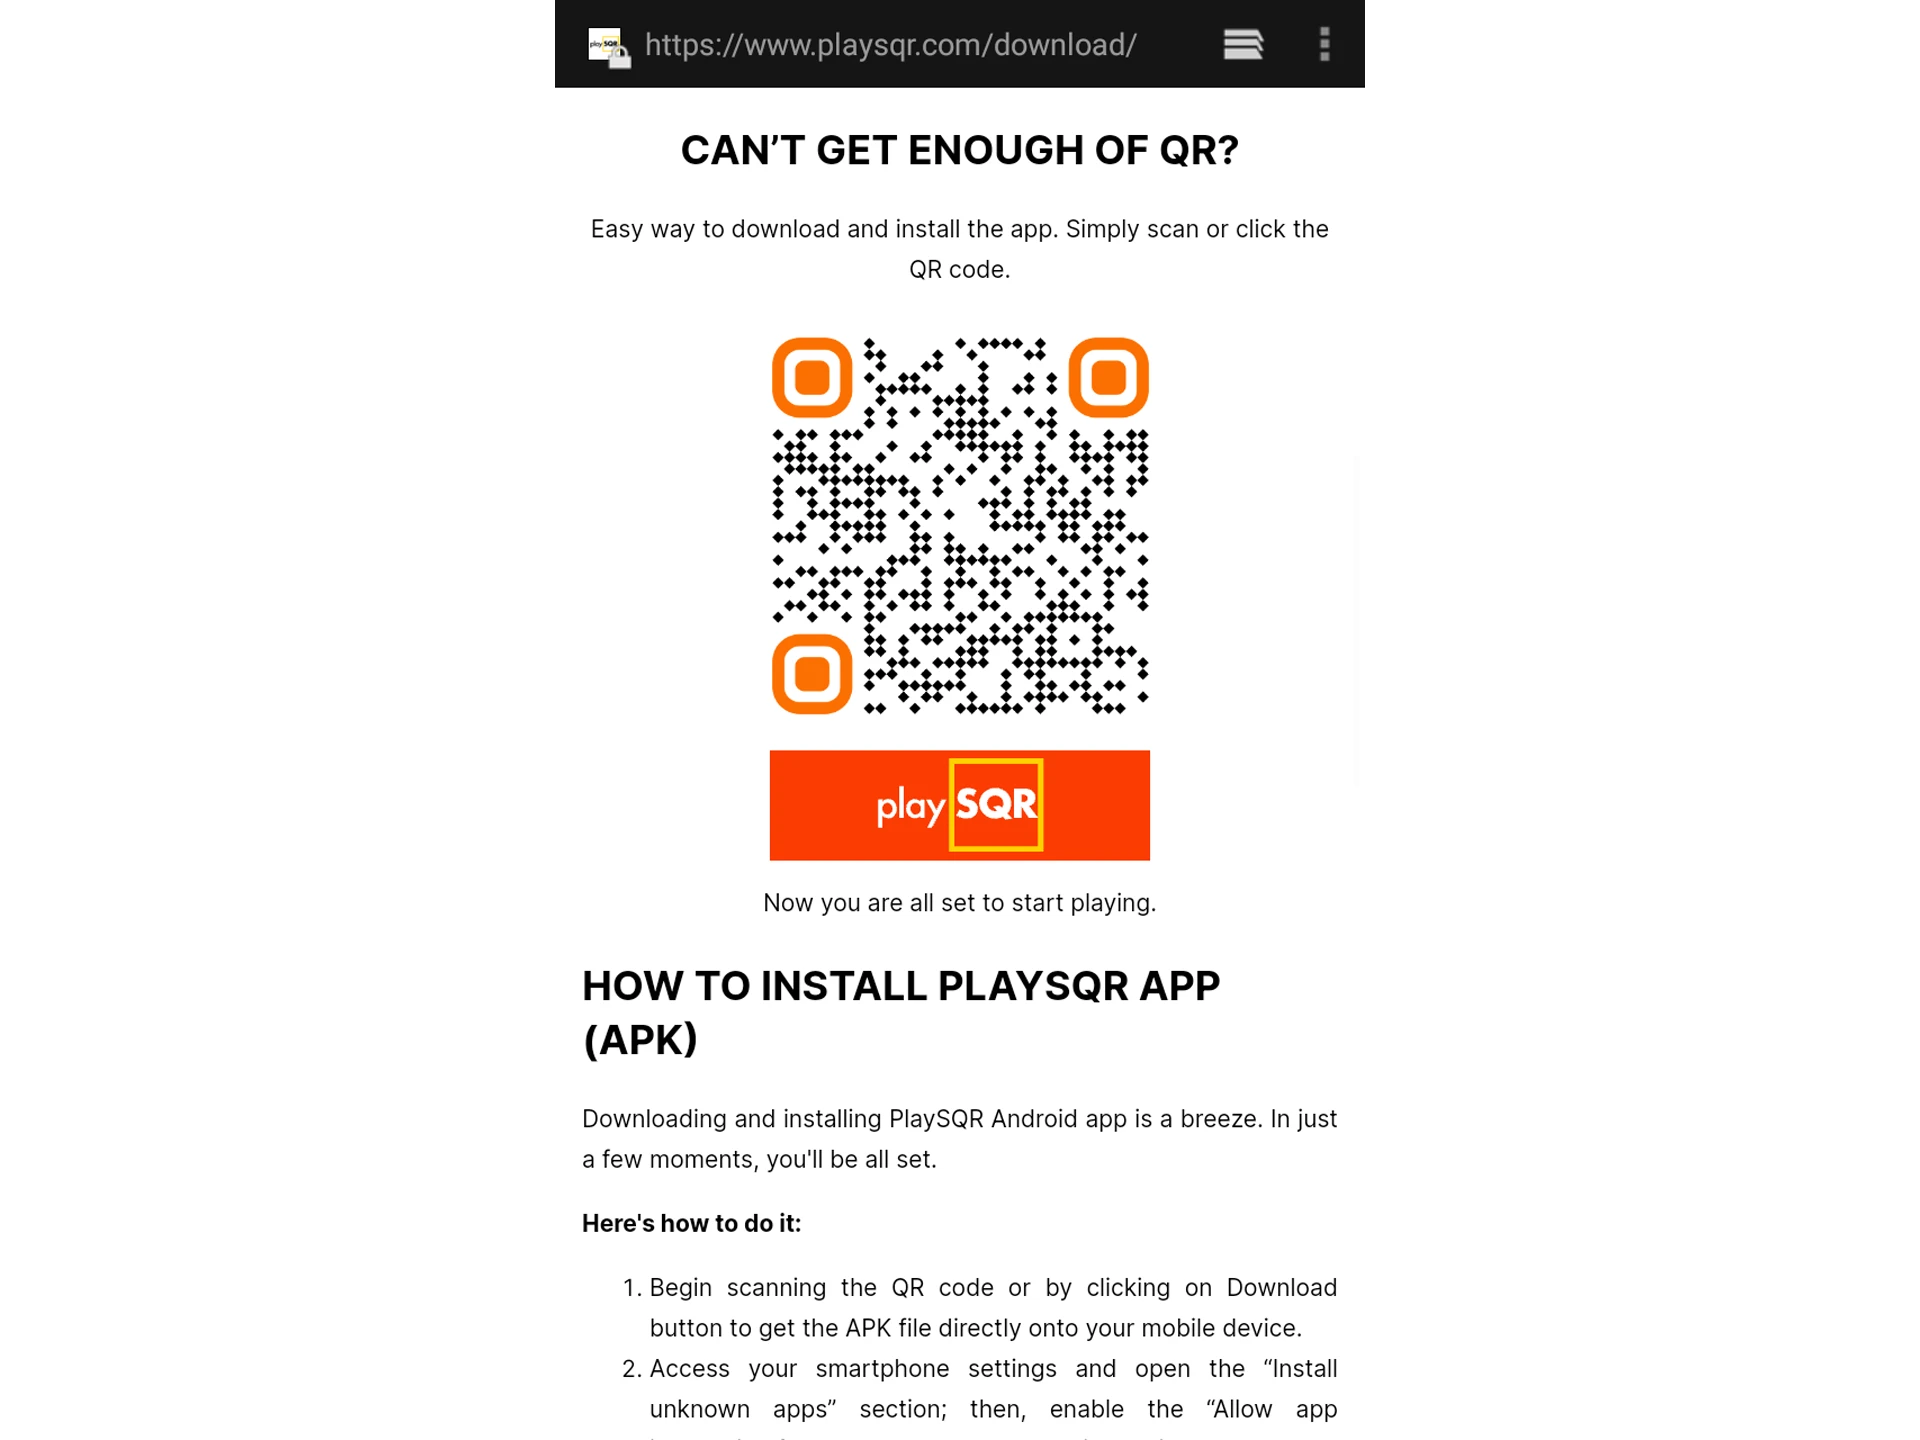 Download the PlaySQR app directly to your Android device.